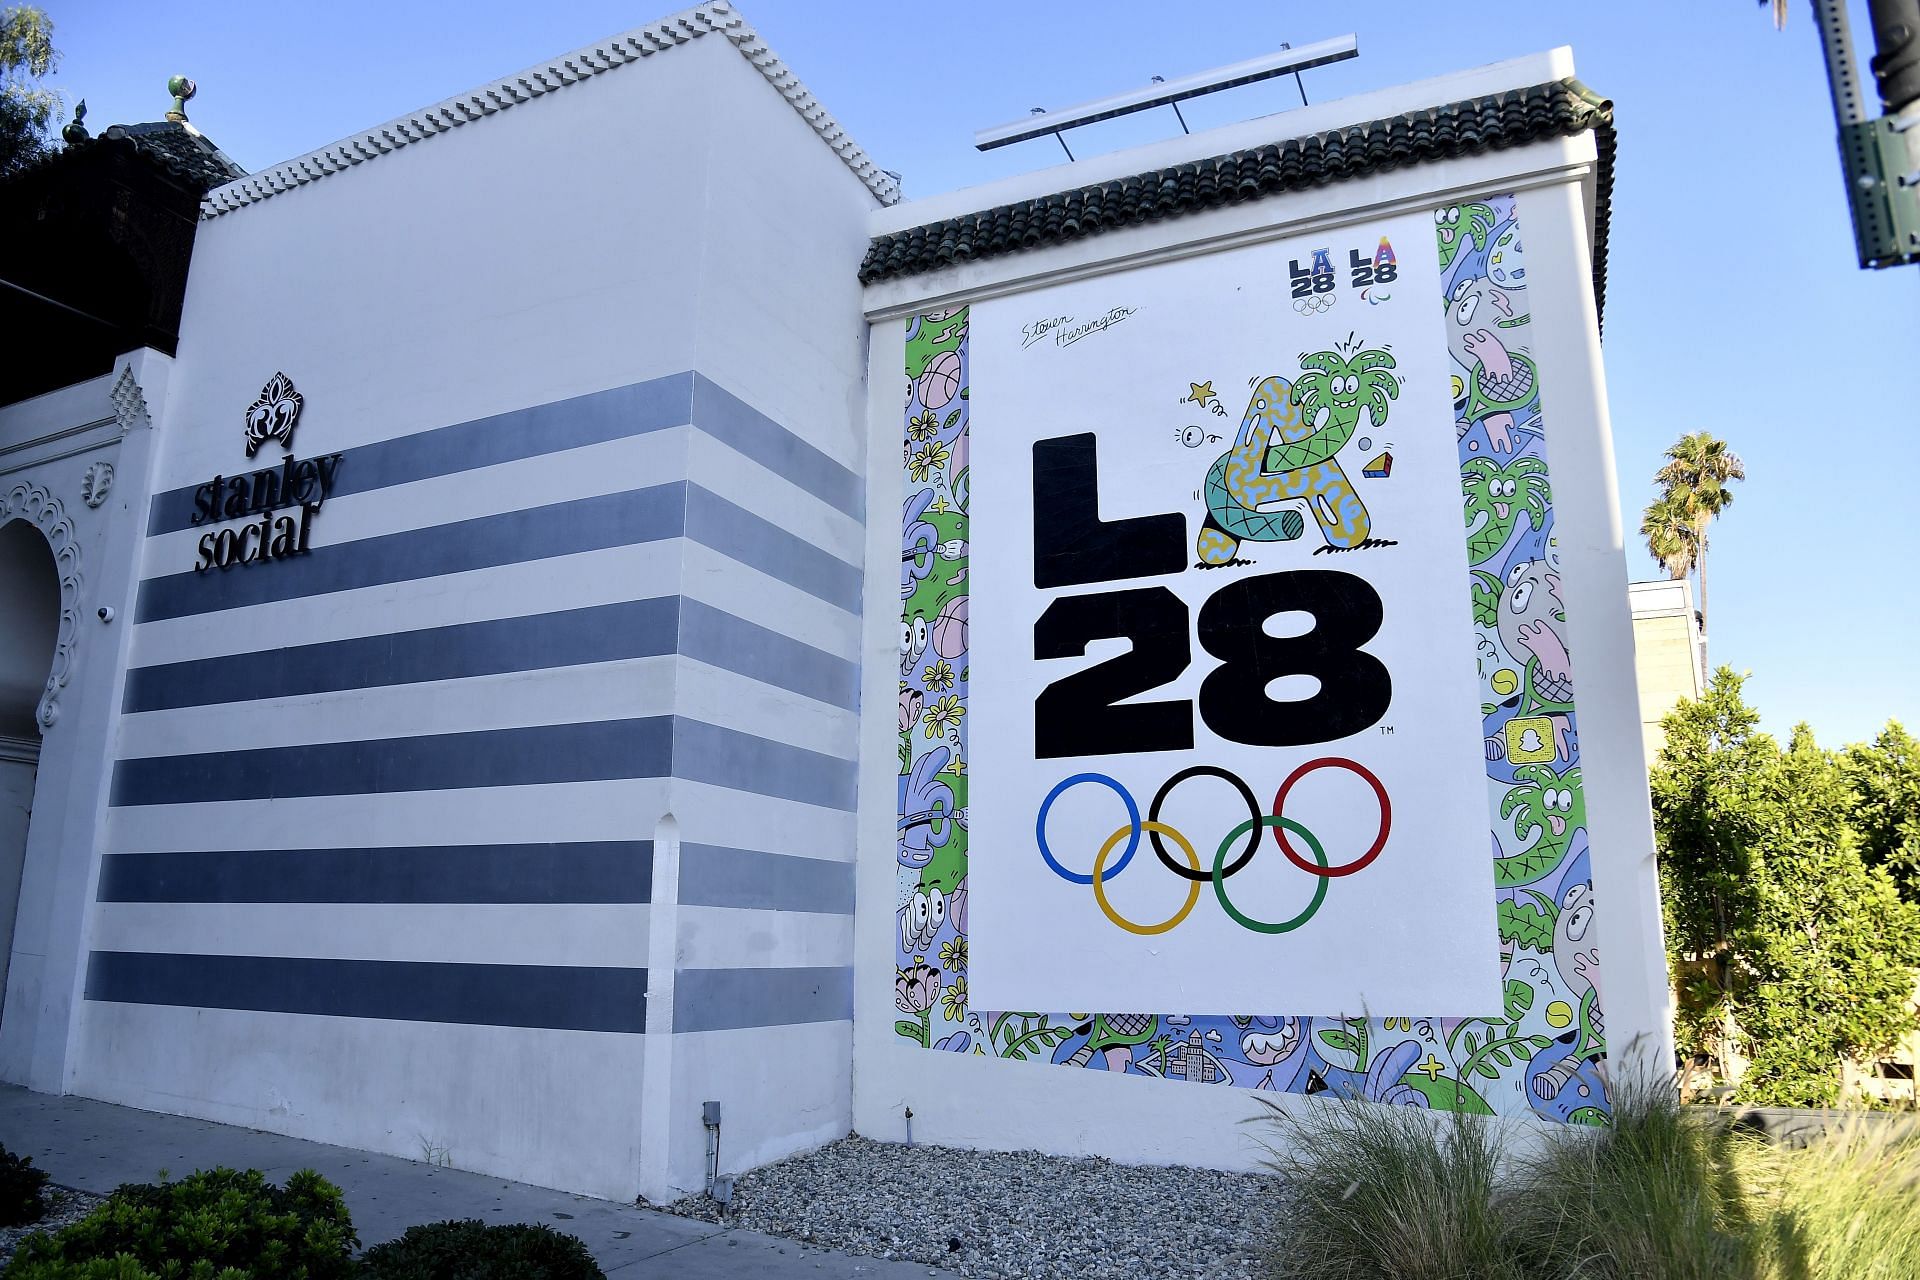 LA28 Reveals New Logo on Murals Throughout Los Angeles